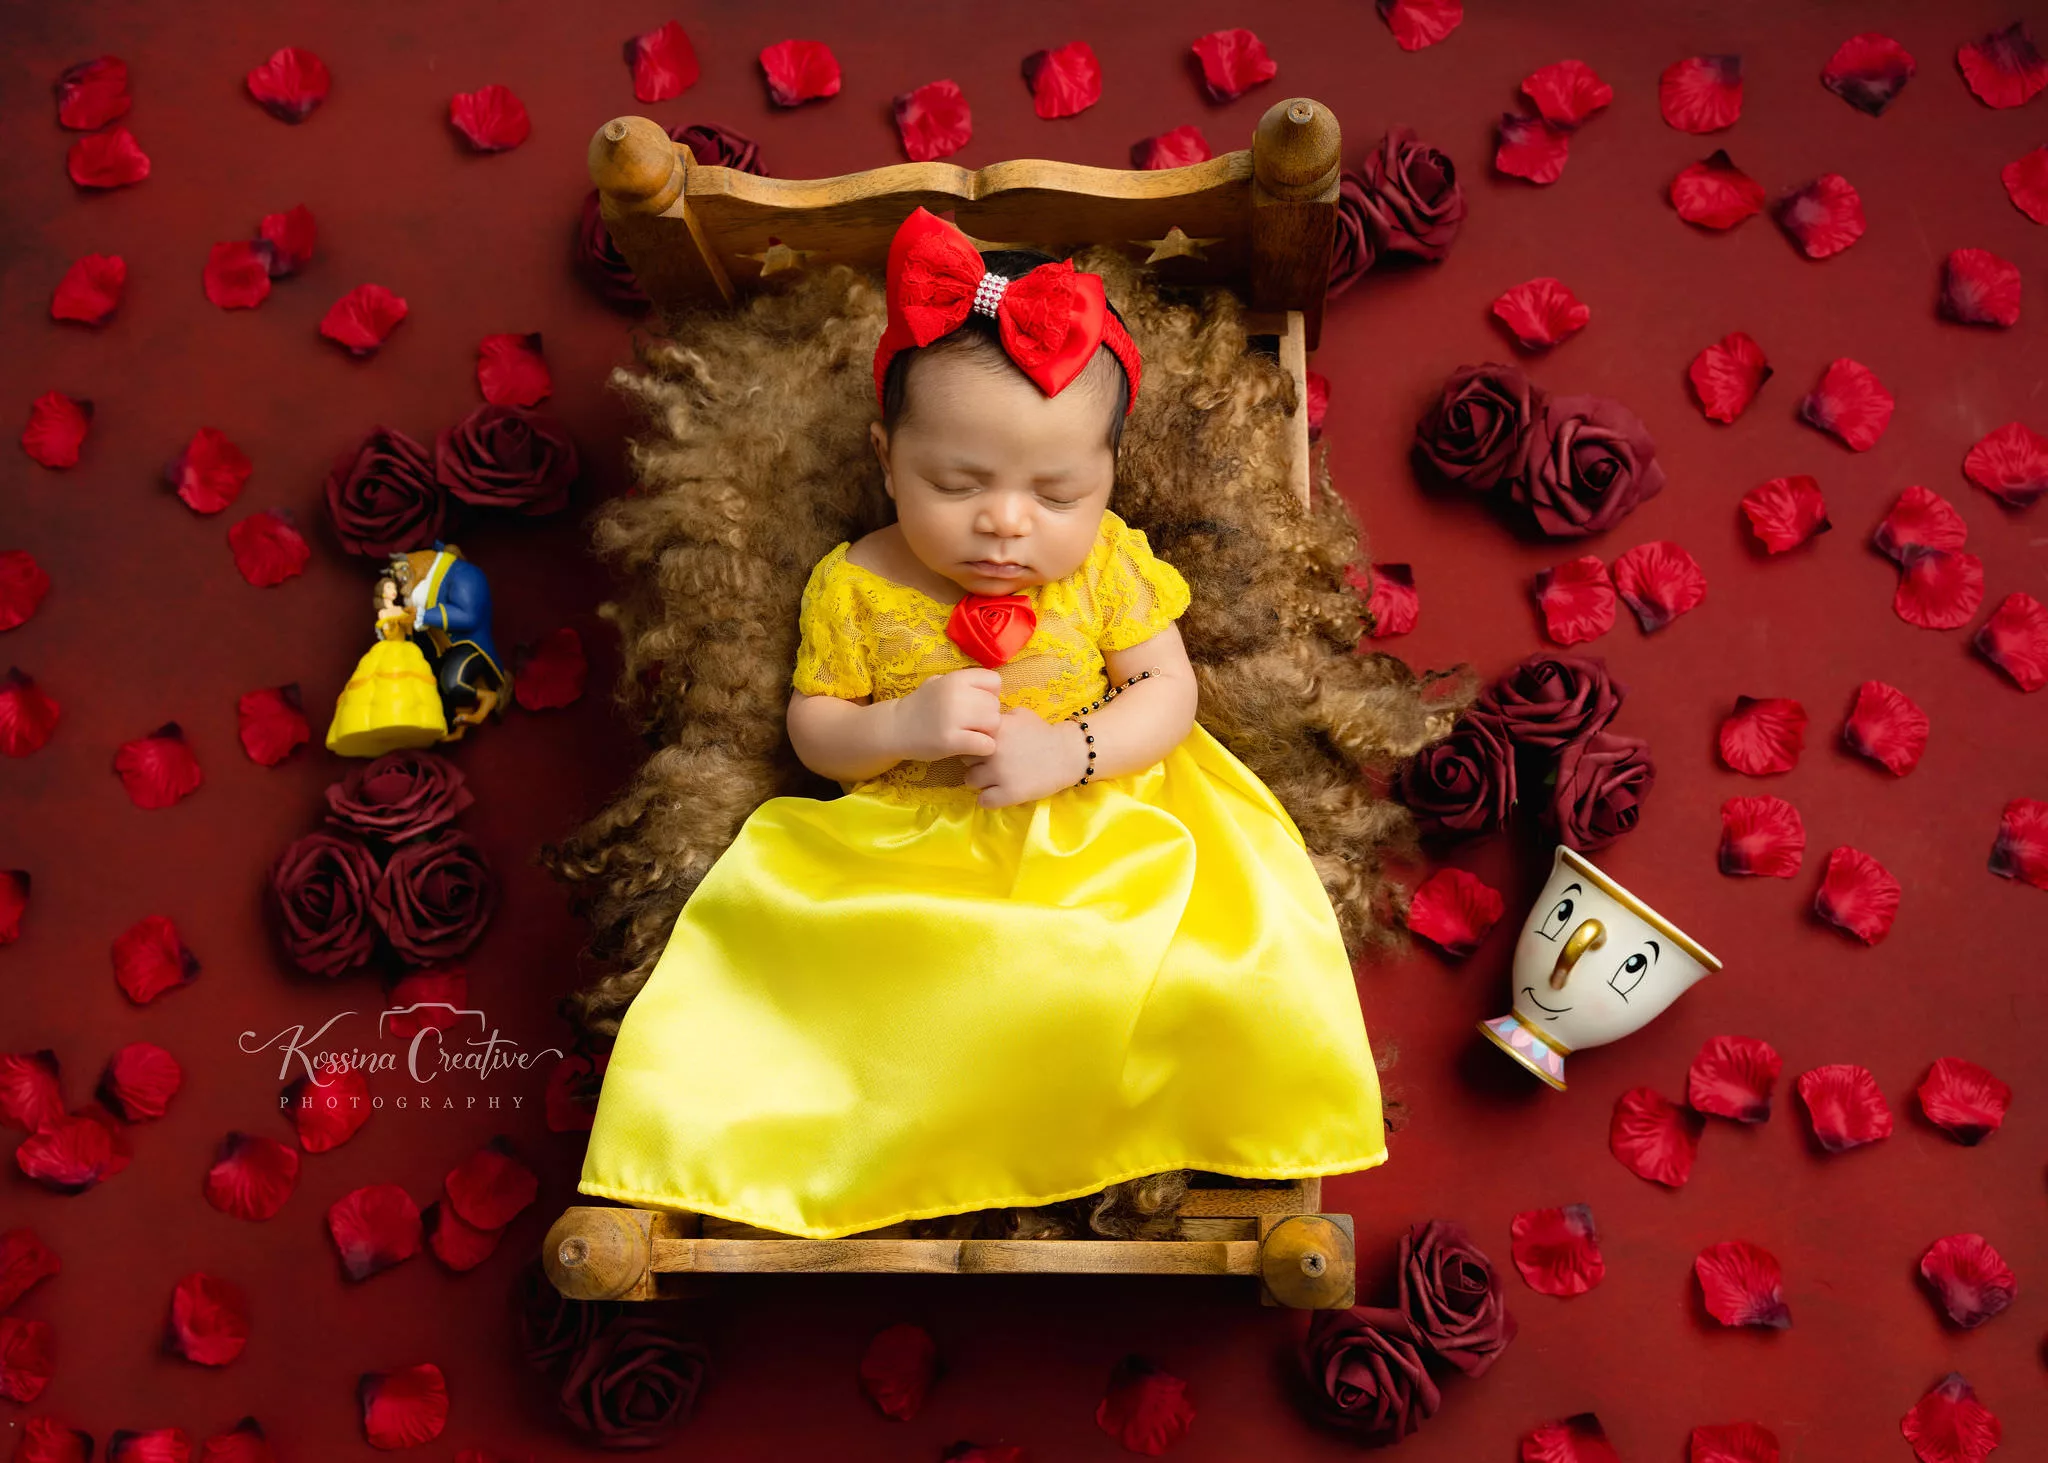 Orlando Newborn Photographer Baby Girl Photo studio disney princess belle sleeping baby bed roses beauty and the beast chip red roses